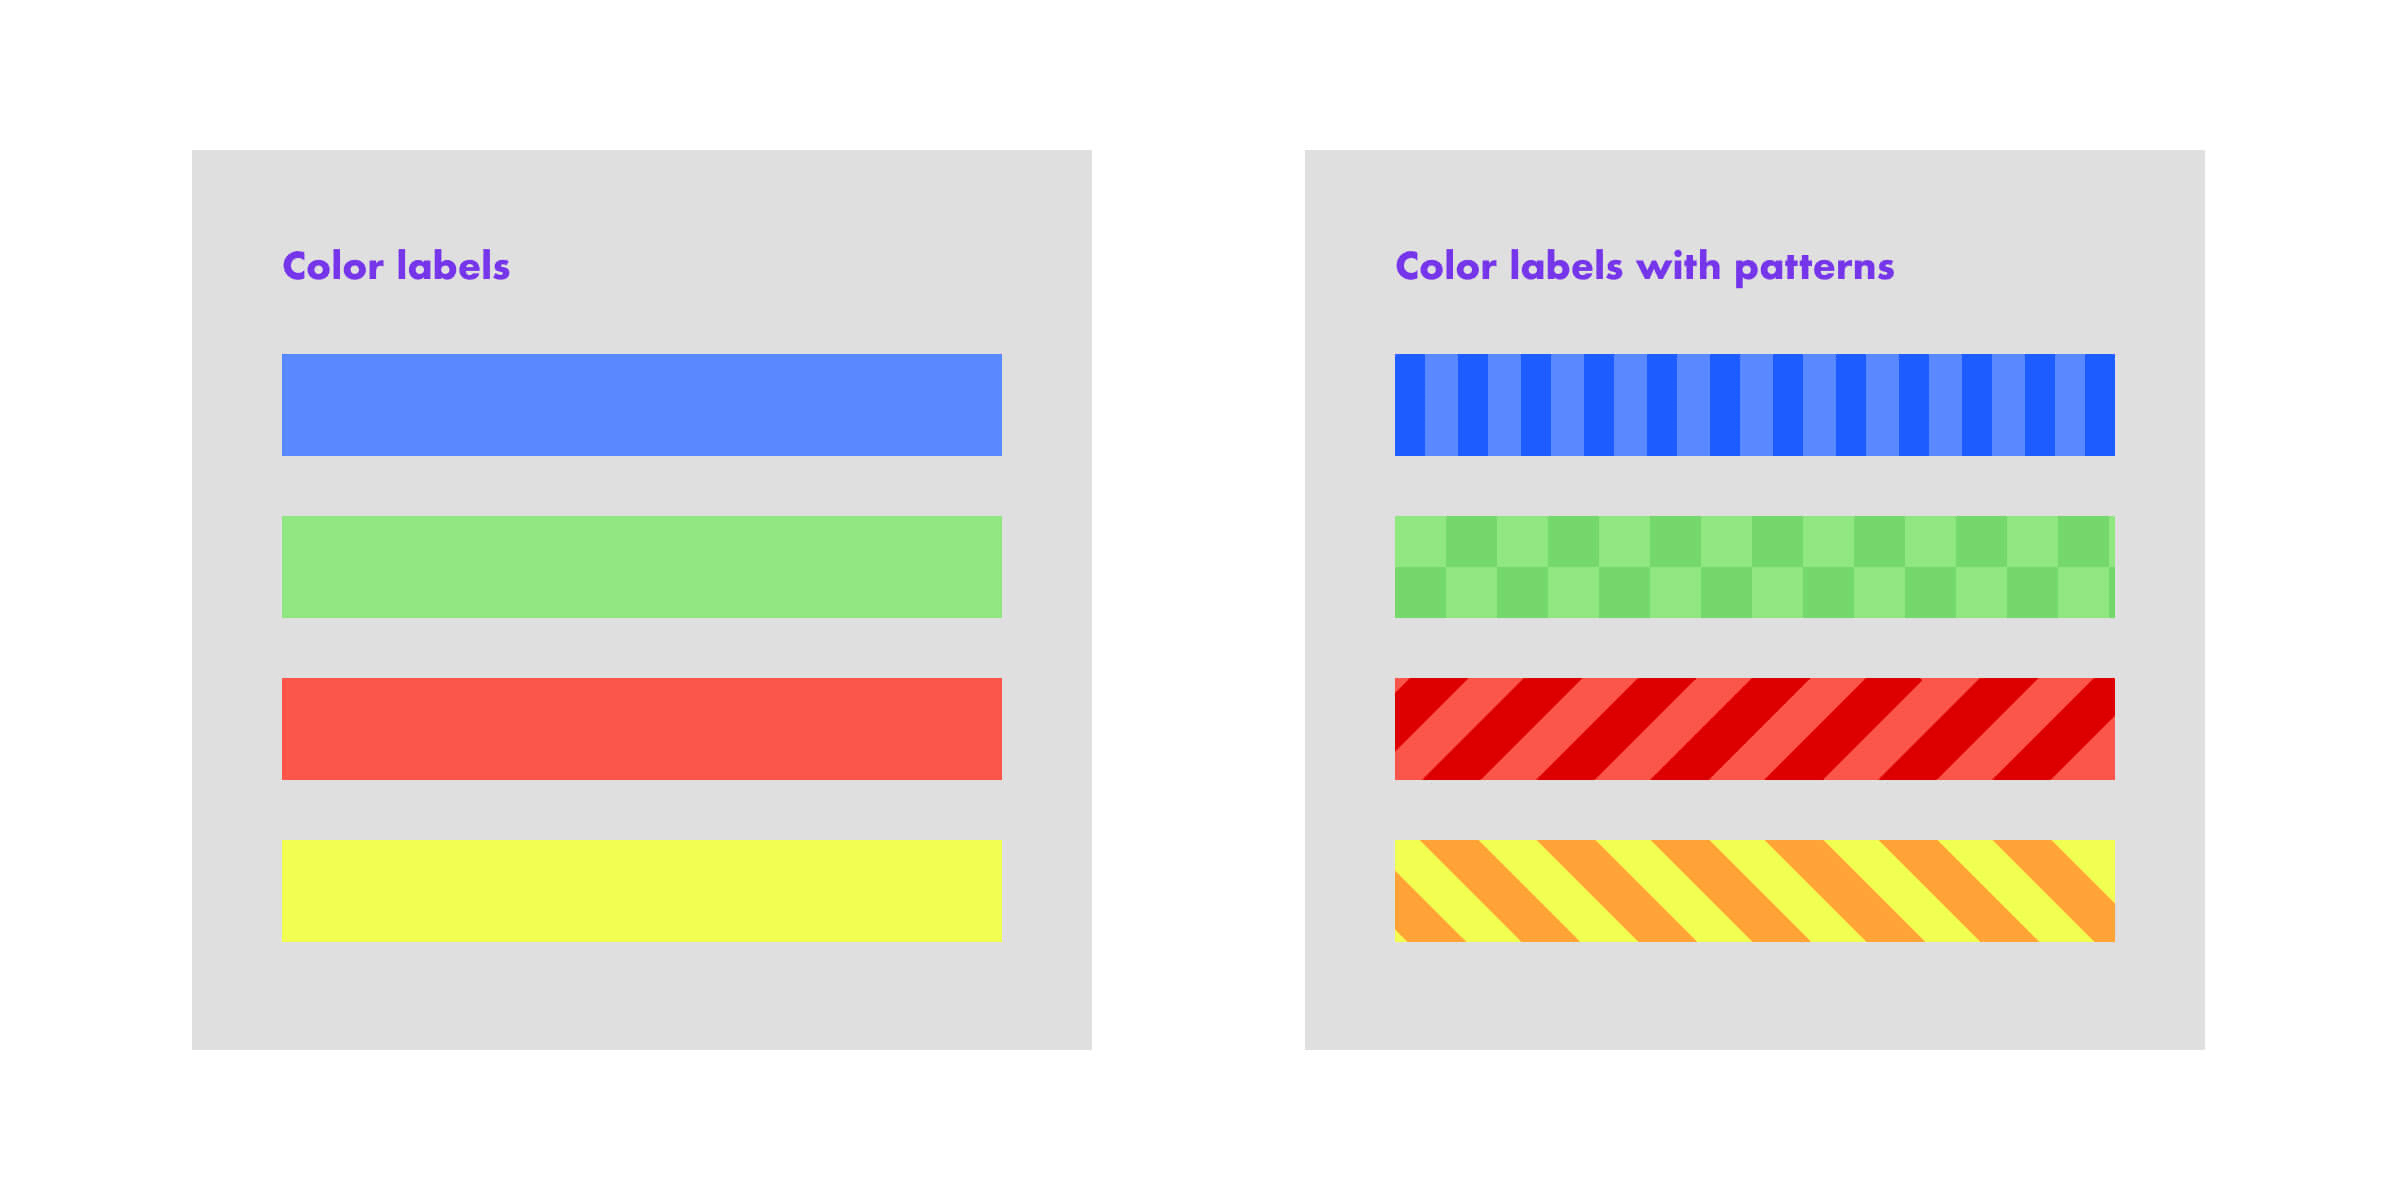 Accessibility in mobile development. Creating color labels using patterns